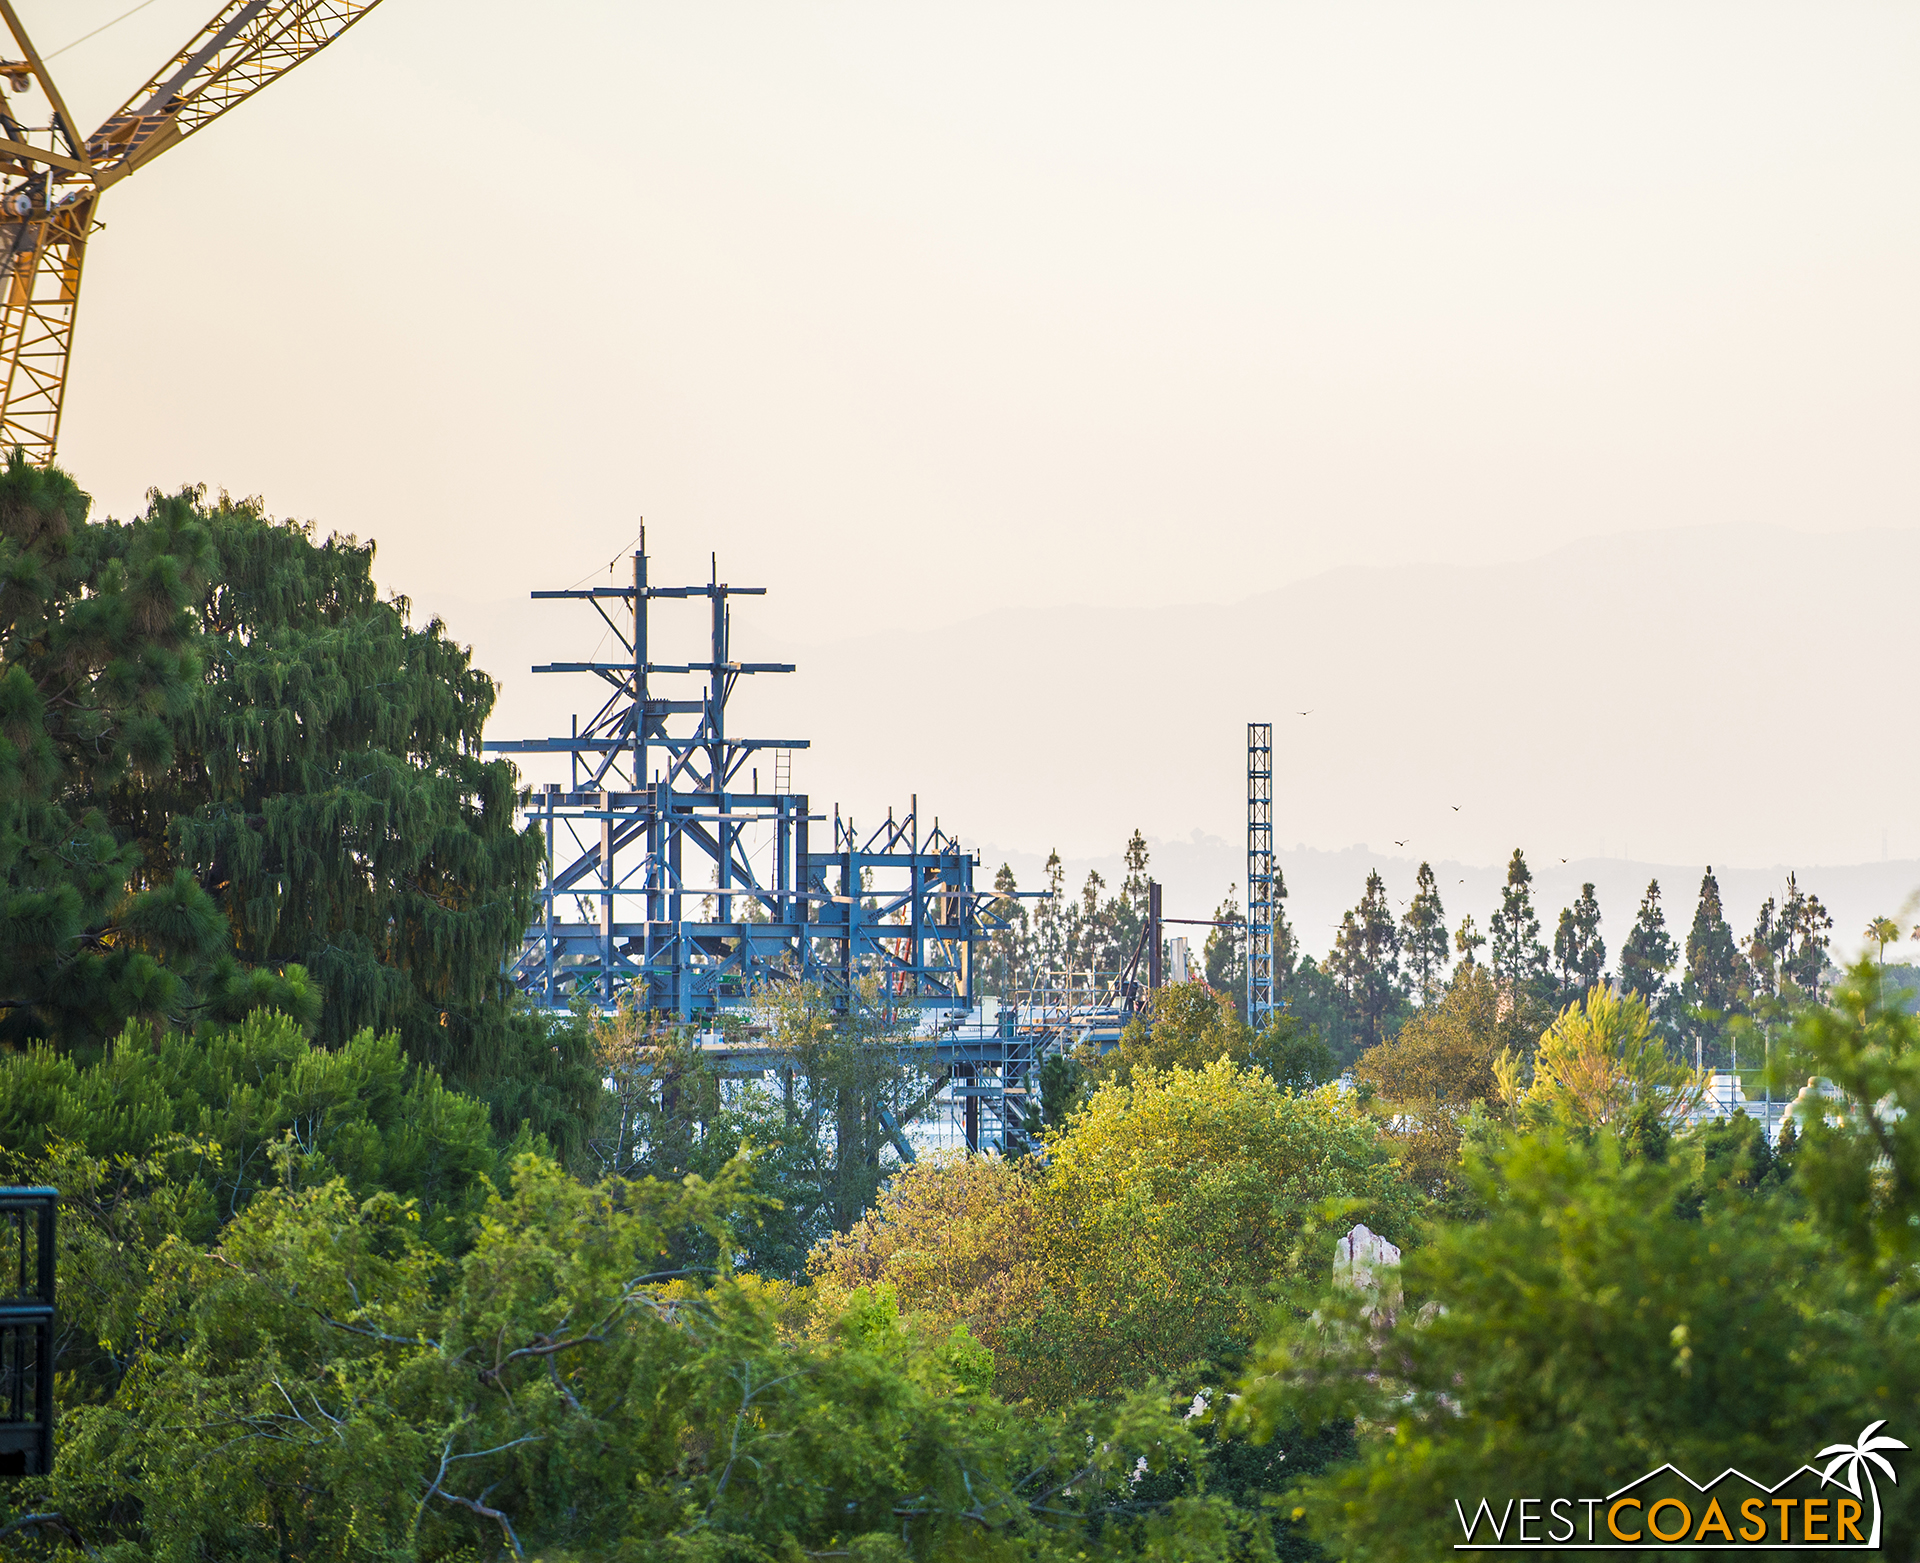  Eventually, this will be covered over to look like mountains from a distance.&nbsp; So there will be an additional visual layer that will actually blend quite well with the rustic nature of Frontierland and the Rivers of America! 